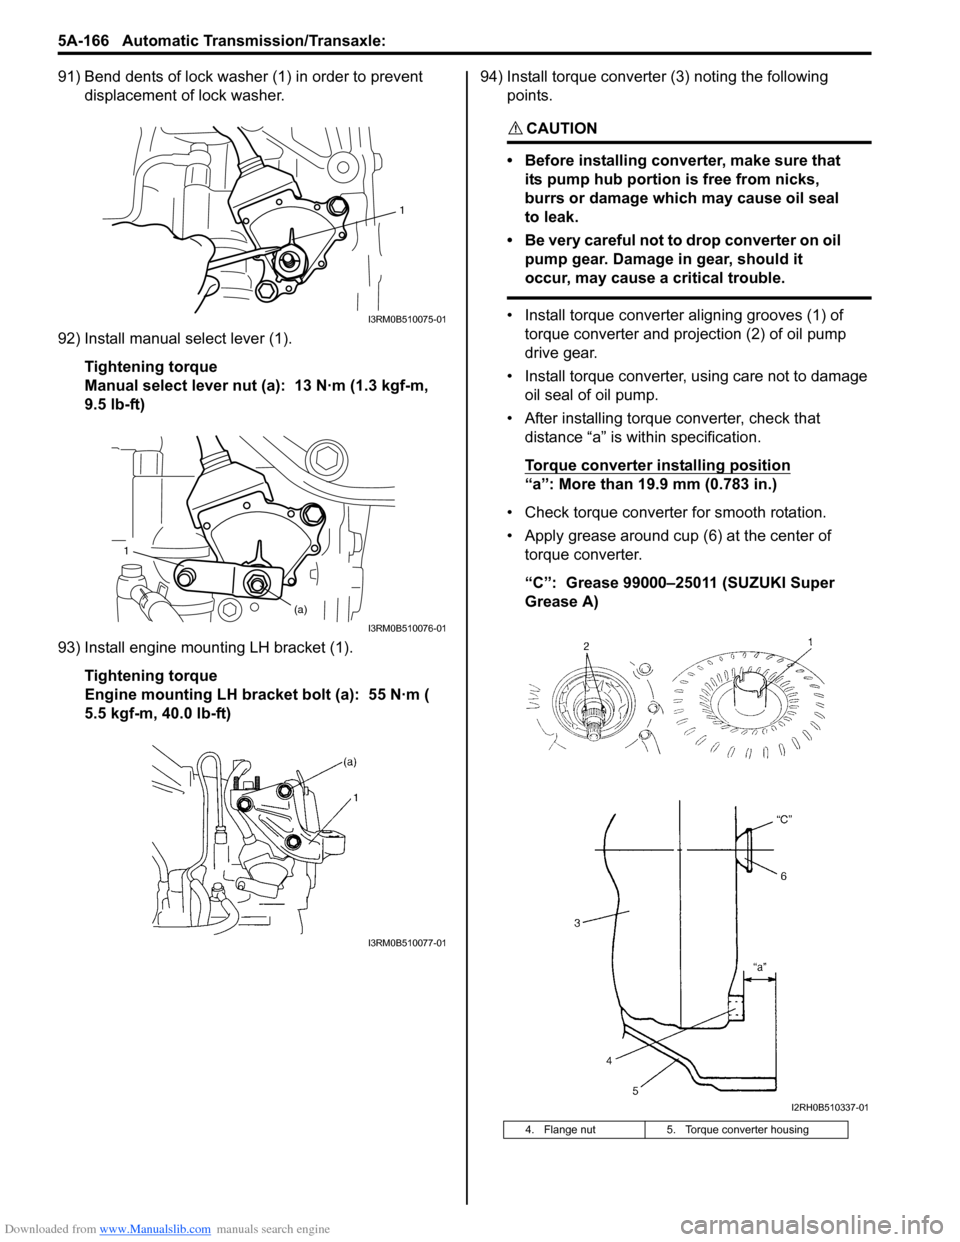 SUZUKI SWIFT 2006 2.G Service Workshop Manual Downloaded from www.Manualslib.com manuals search engine 5A-166 Automatic Transmission/Transaxle: 
91) Bend dents of lock washer (1) in order to prevent displacement of lock washer.
92) Install manual